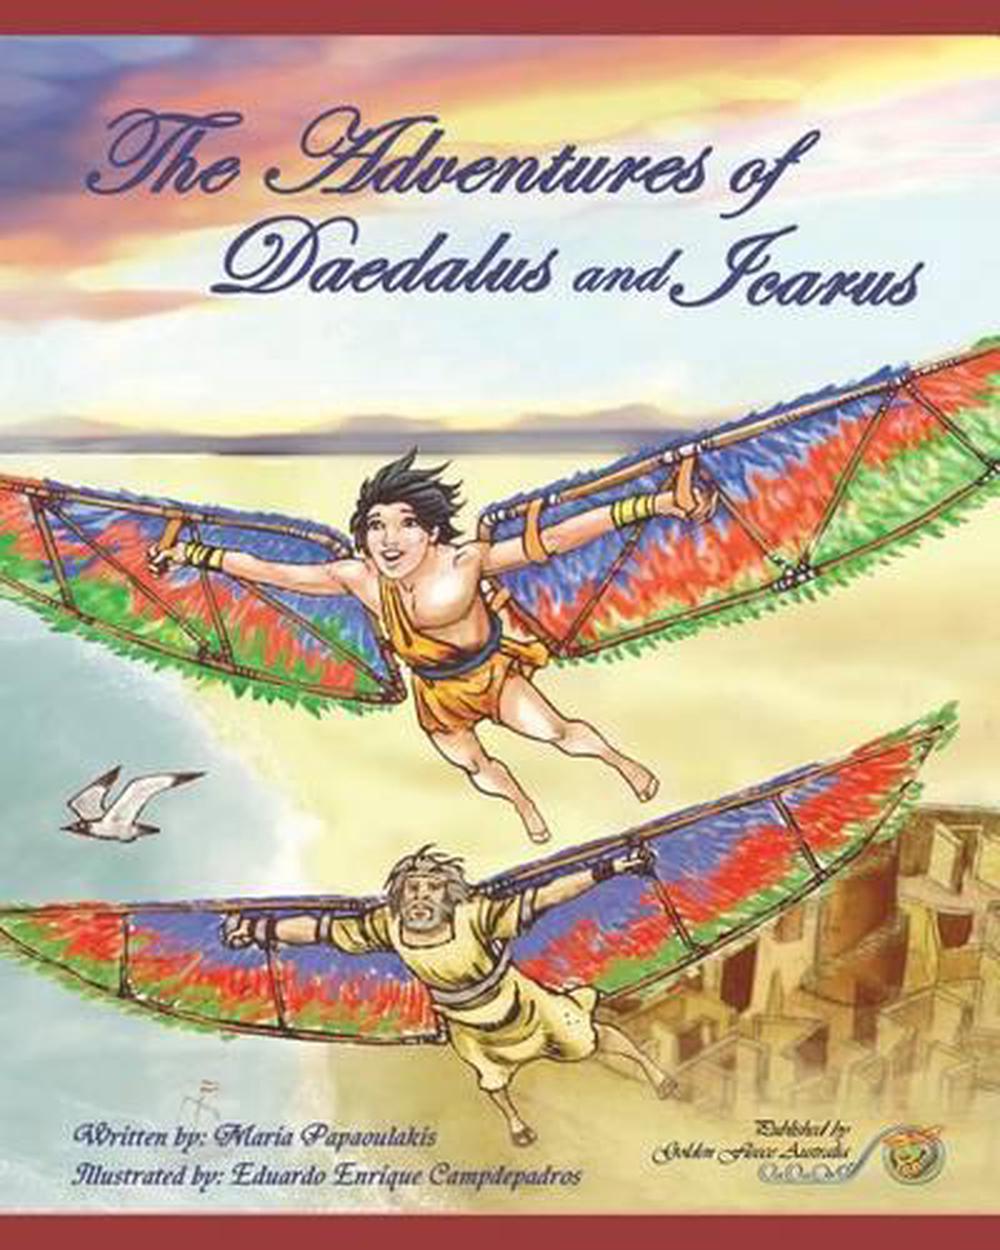 the myth daedalus and icarus story